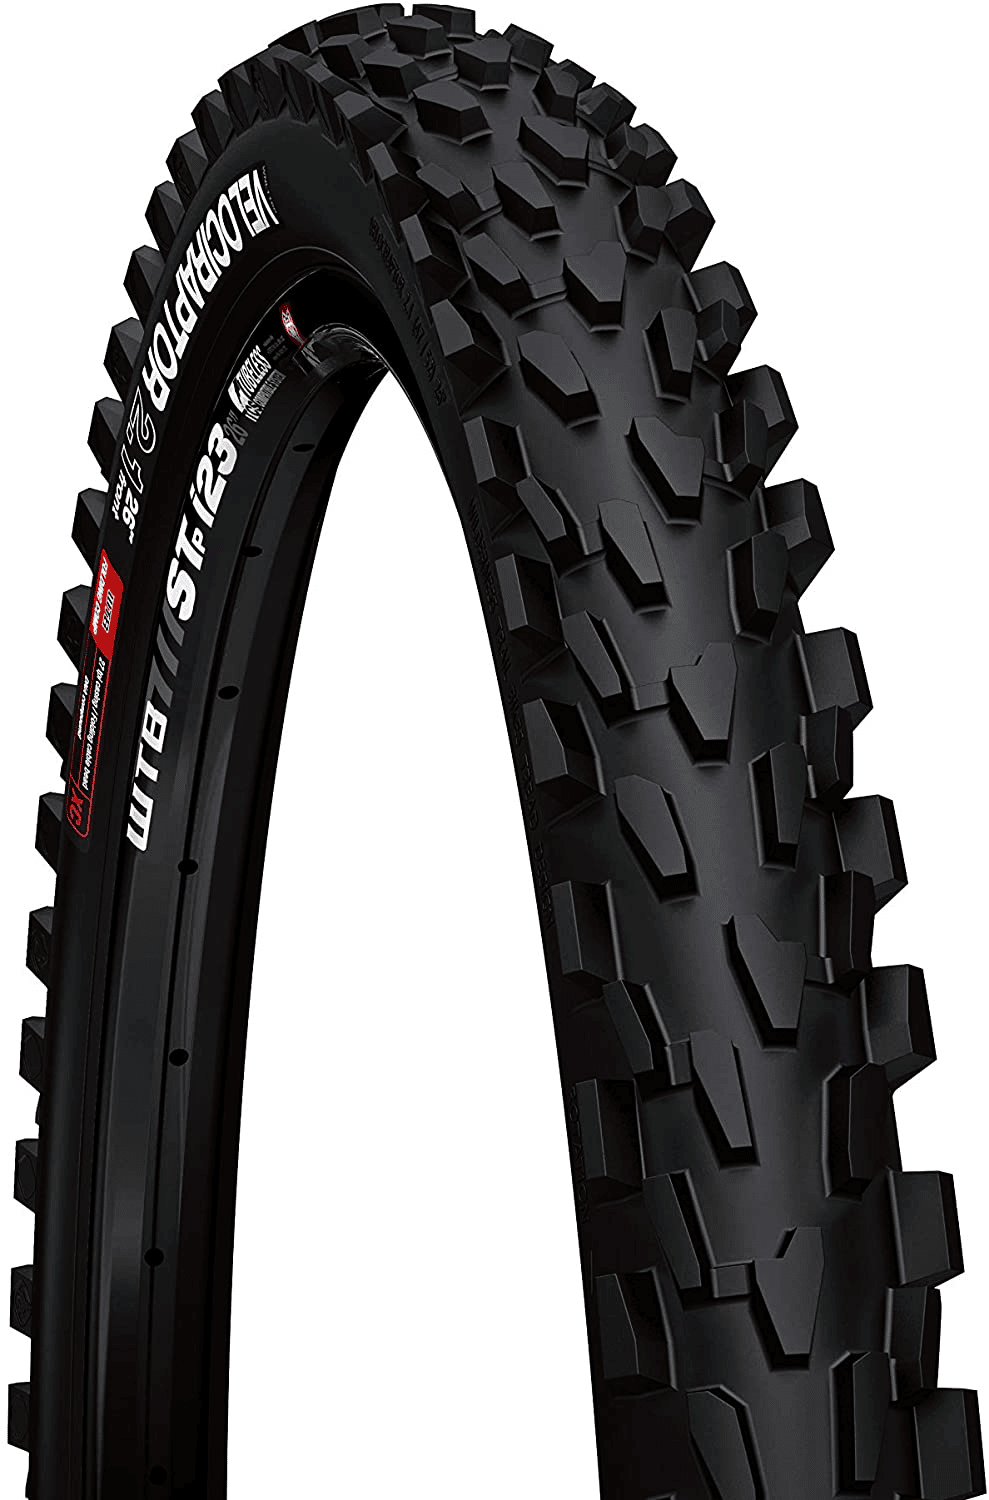 The knobs on these mountain bike tires are spread out allowing for maximized grip on rocky terrain.